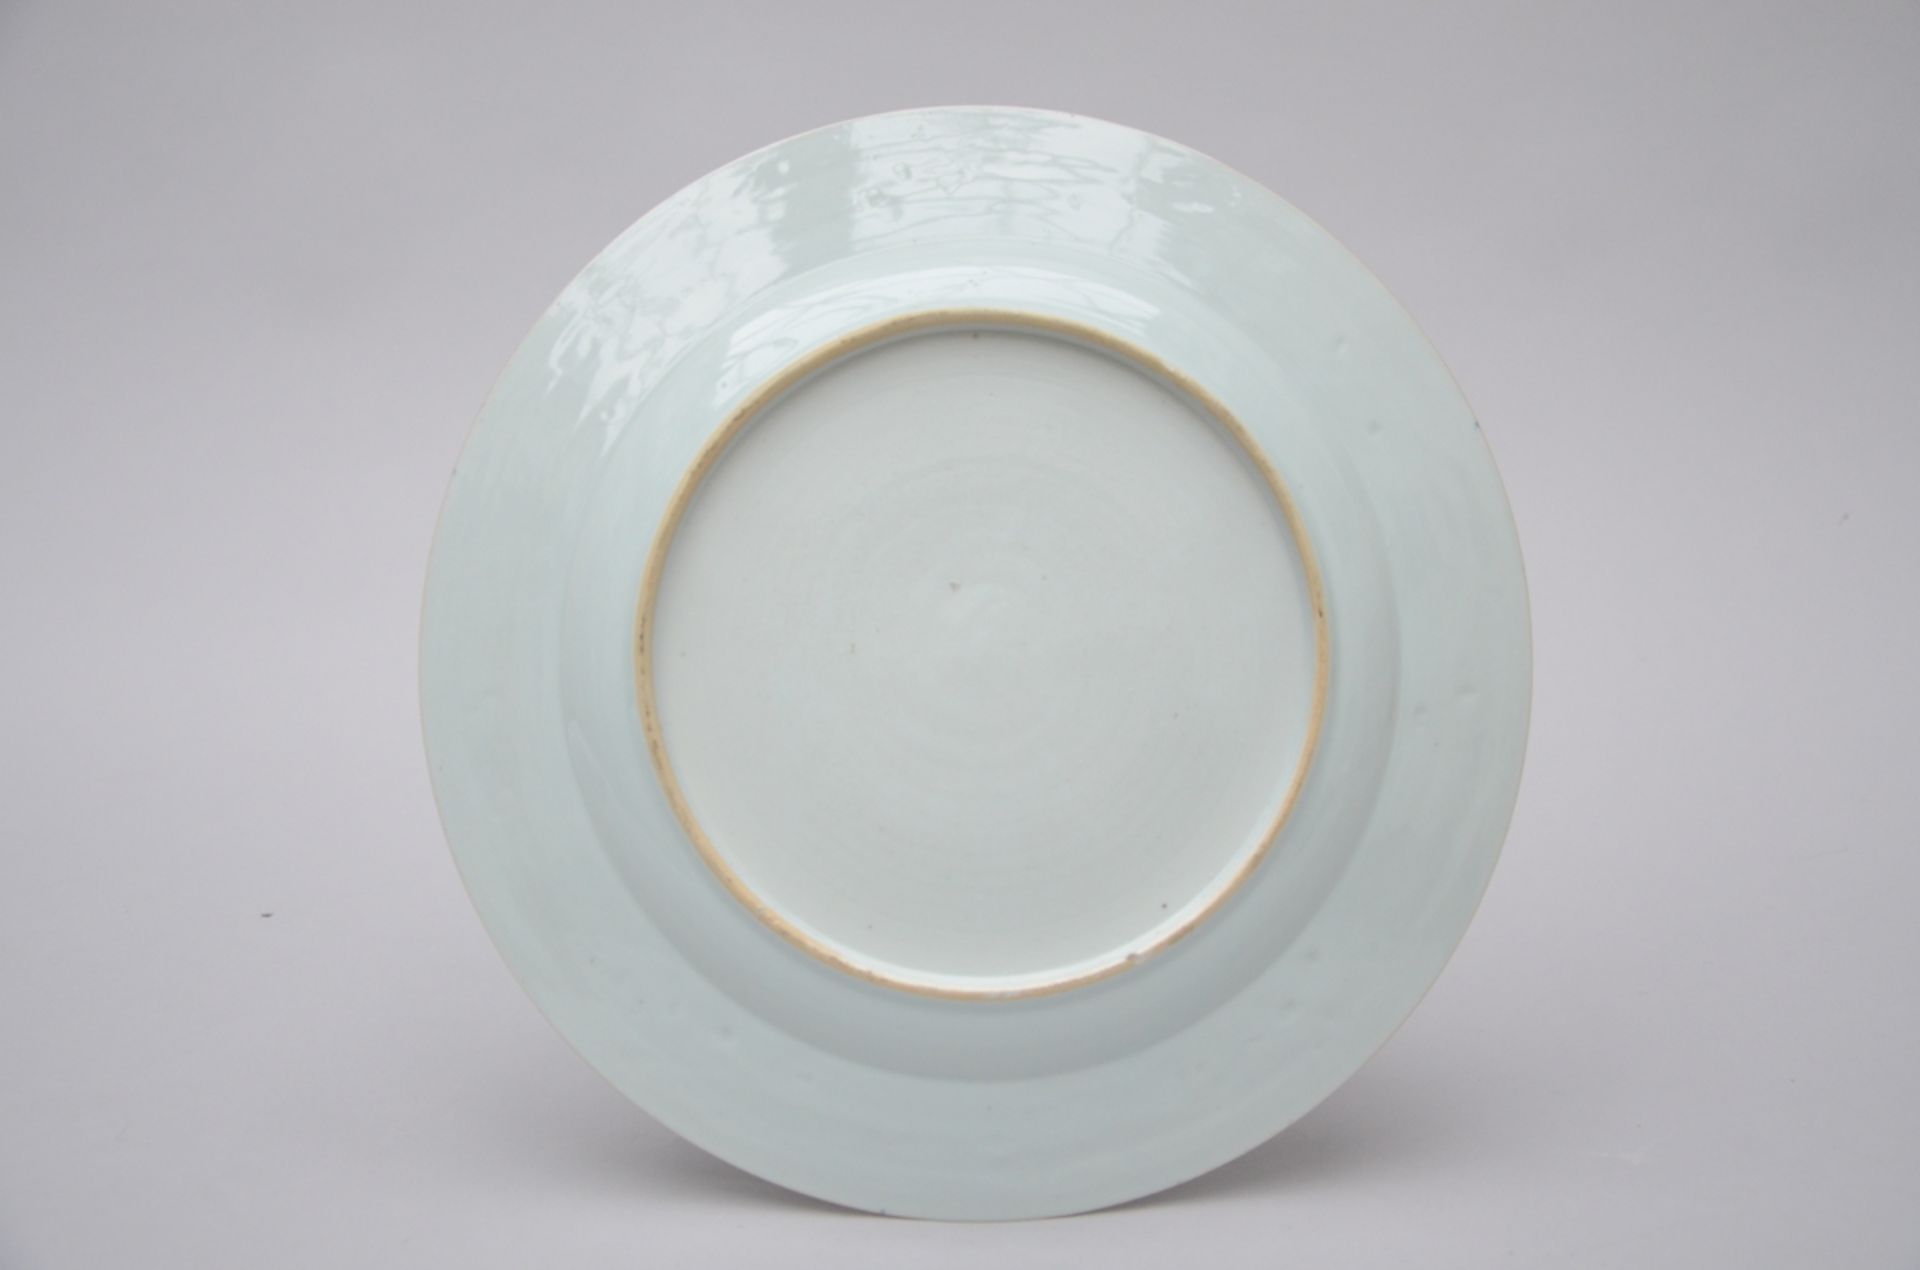 A dish in Chinese 'bleu poudré' porcelain, 18th century (dia 32 cm) - Image 2 of 2